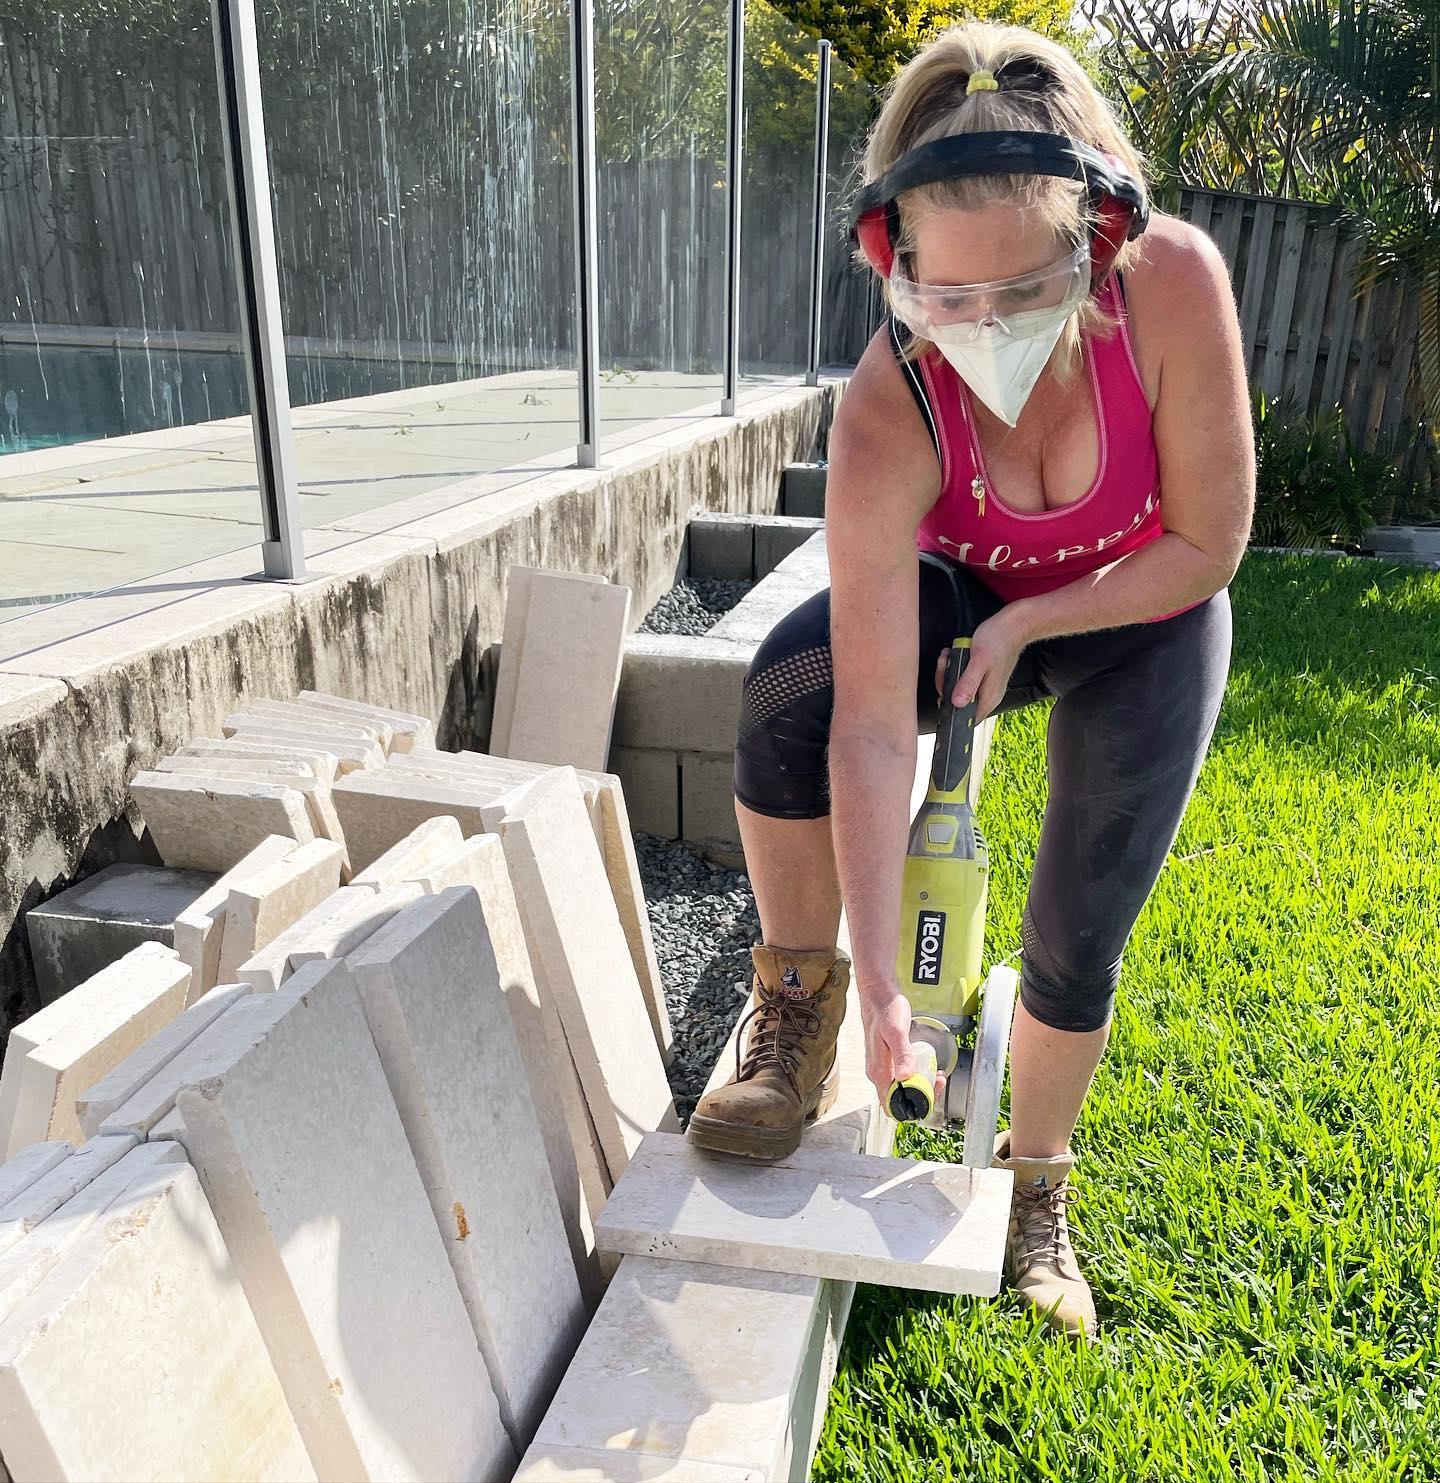 It’s still a work in progress but ryobiau angle grinder was the hero of the day this long weekend as we work on our backyard project! Cutting stone tiles for the edging around our raised garden beds 🪴 #ryobimade